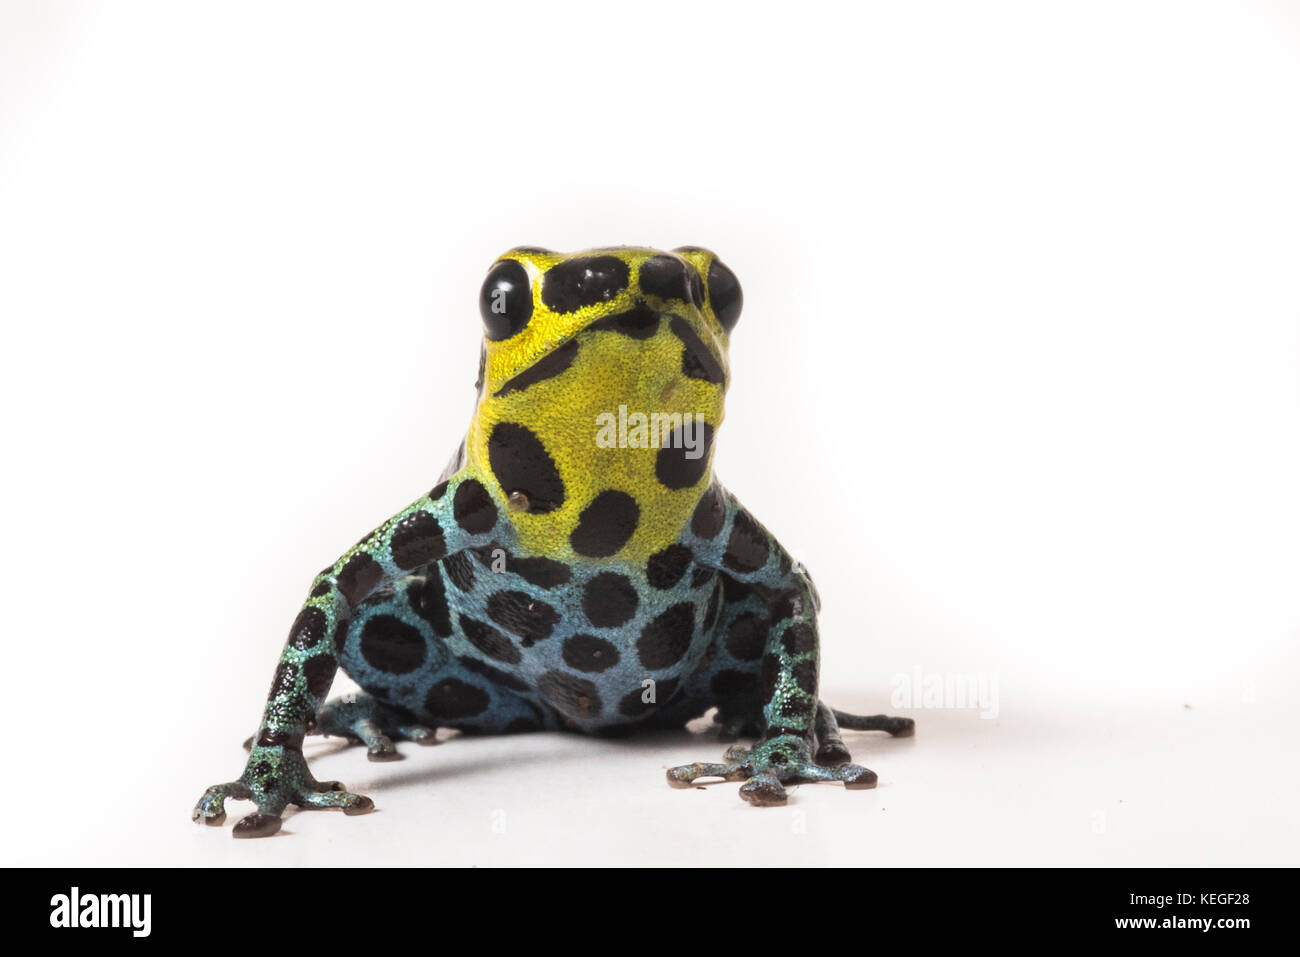 Zimmerman's poison frog (Ranitomeya variabilis) is tiny but extremely beautiful. It relies on its toxins to keep it safe from predators. Stock Photo